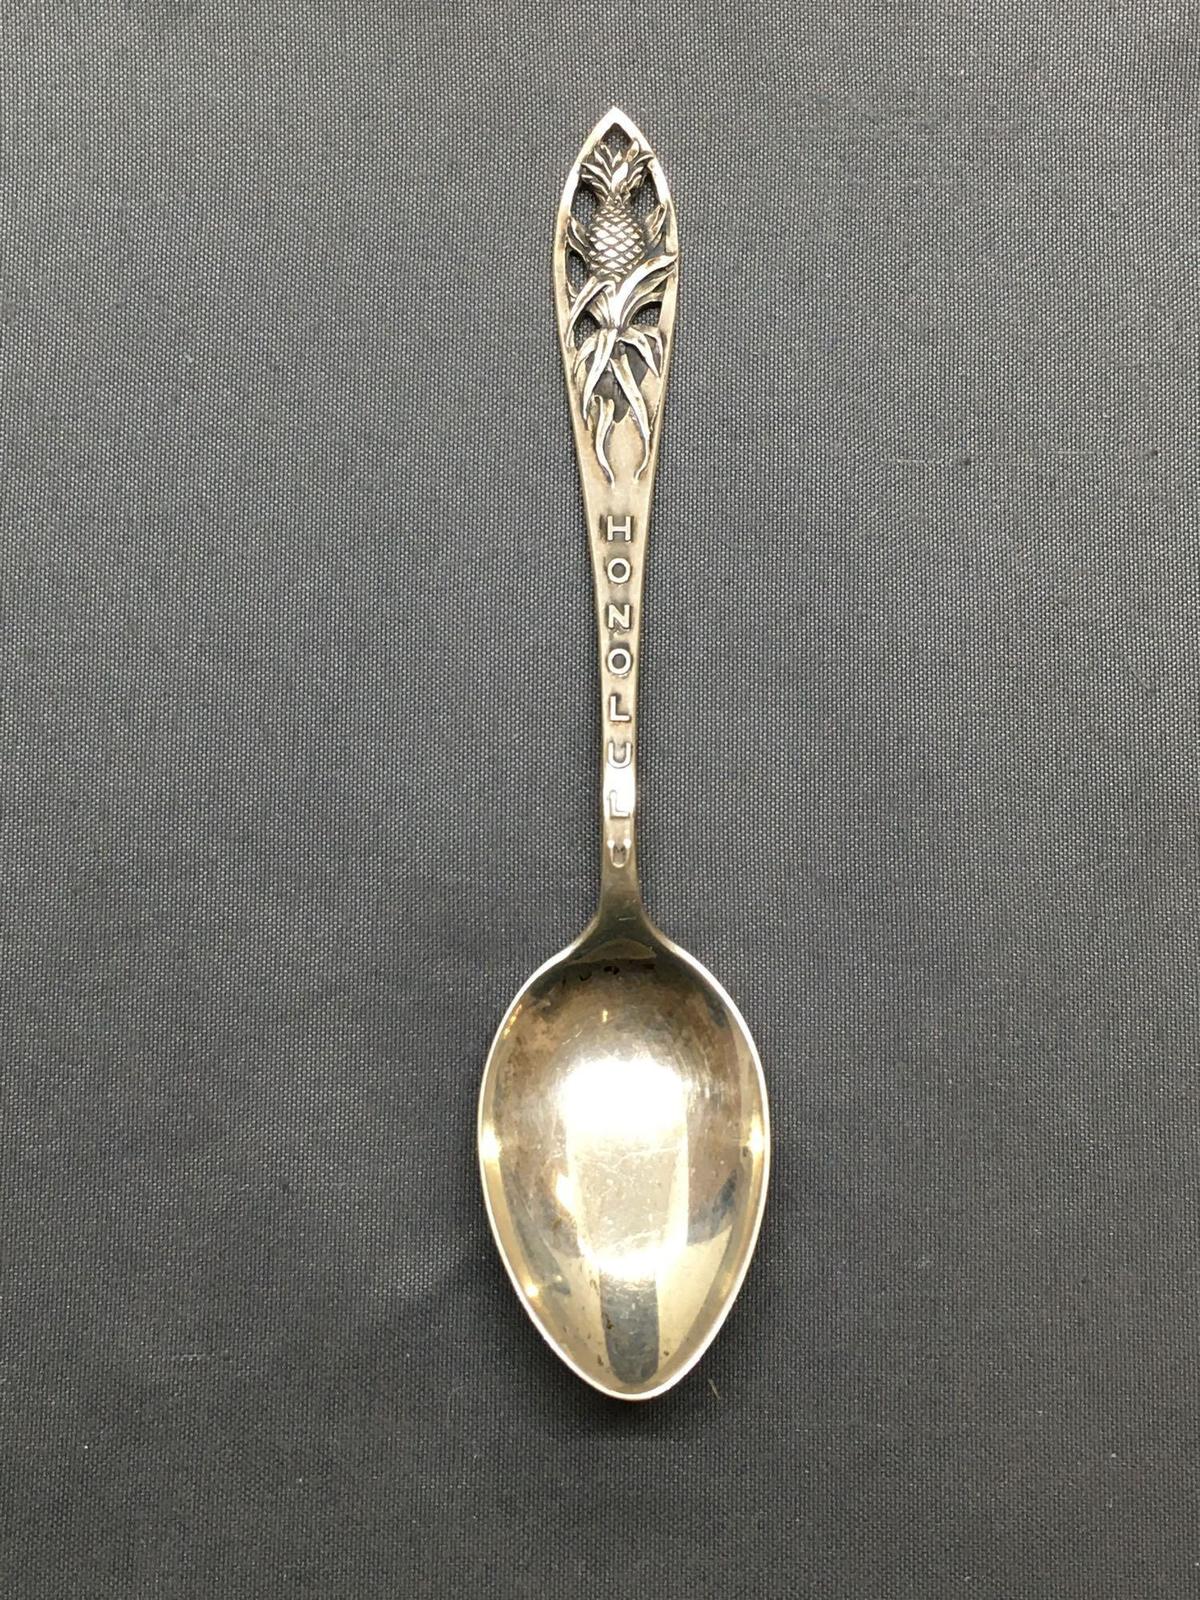 Honolulu Themed 4in Long 1in Wide Signed Designer Sterling Silver Collectible Spoon